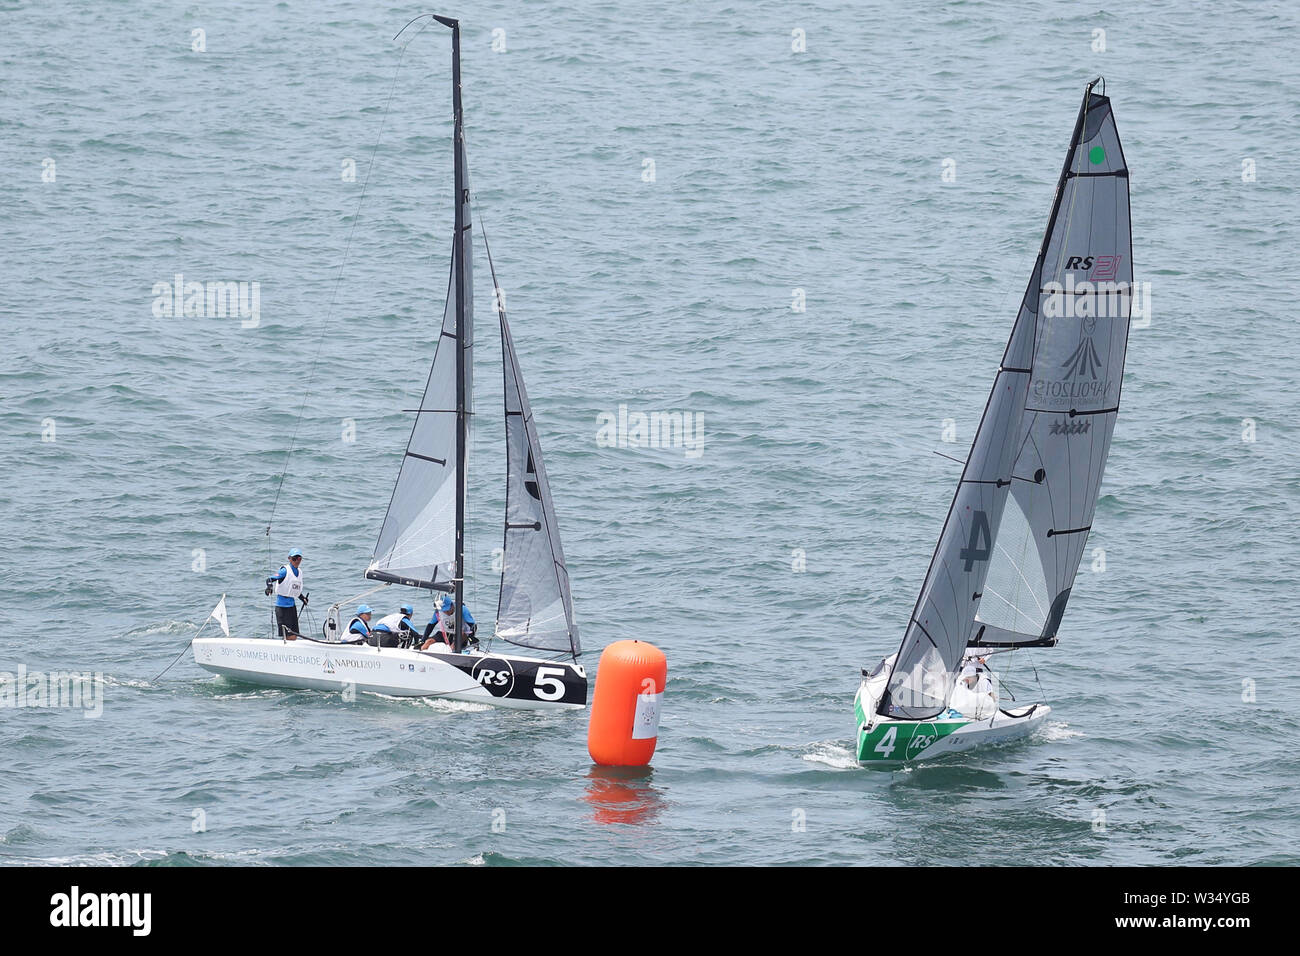 Naples, Italy. 12th July, 2019. Sailors of China (L) prepare to turn at a buoy during the Petit Final of RS21 Mixed Fleet Racing of Sailing at the 30th Summer Universiade in Naples, Italy, July 12, 2019. Credit: Zheng Huansong/Xinhua/Alamy Live News Stock Photo